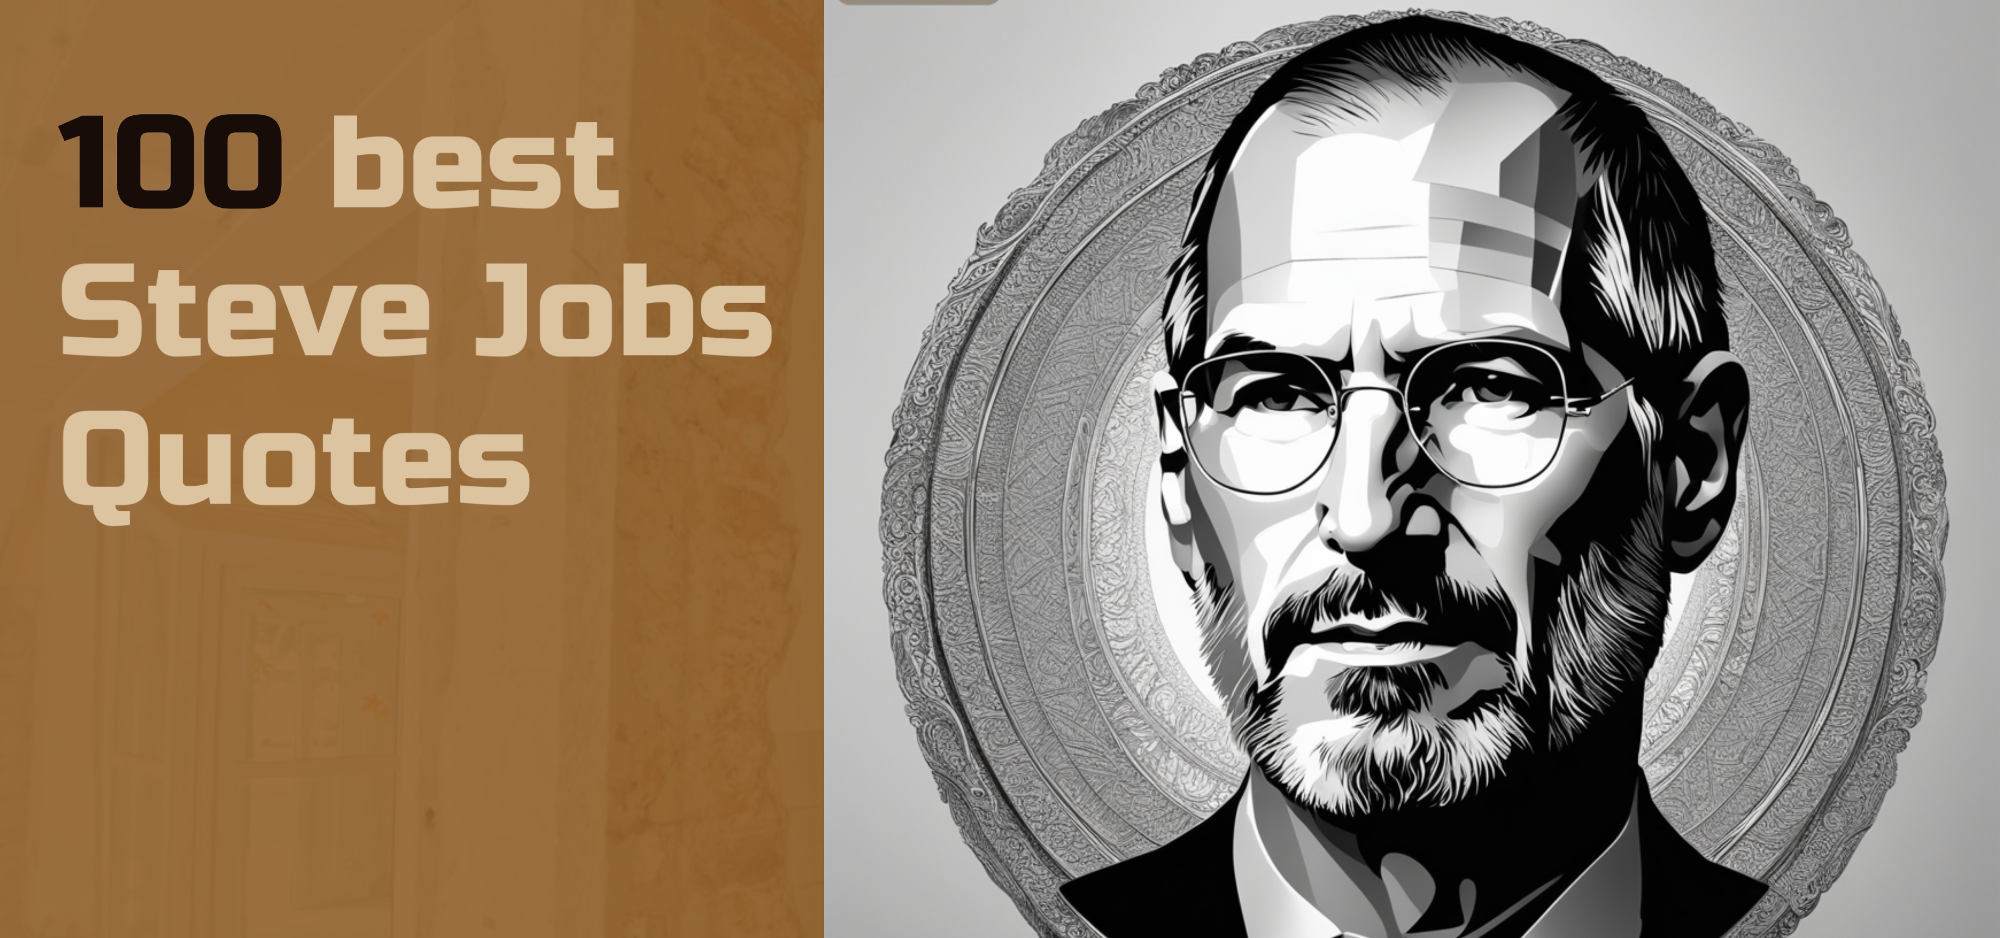 100 Best Steve Jobs Quotes of all Time